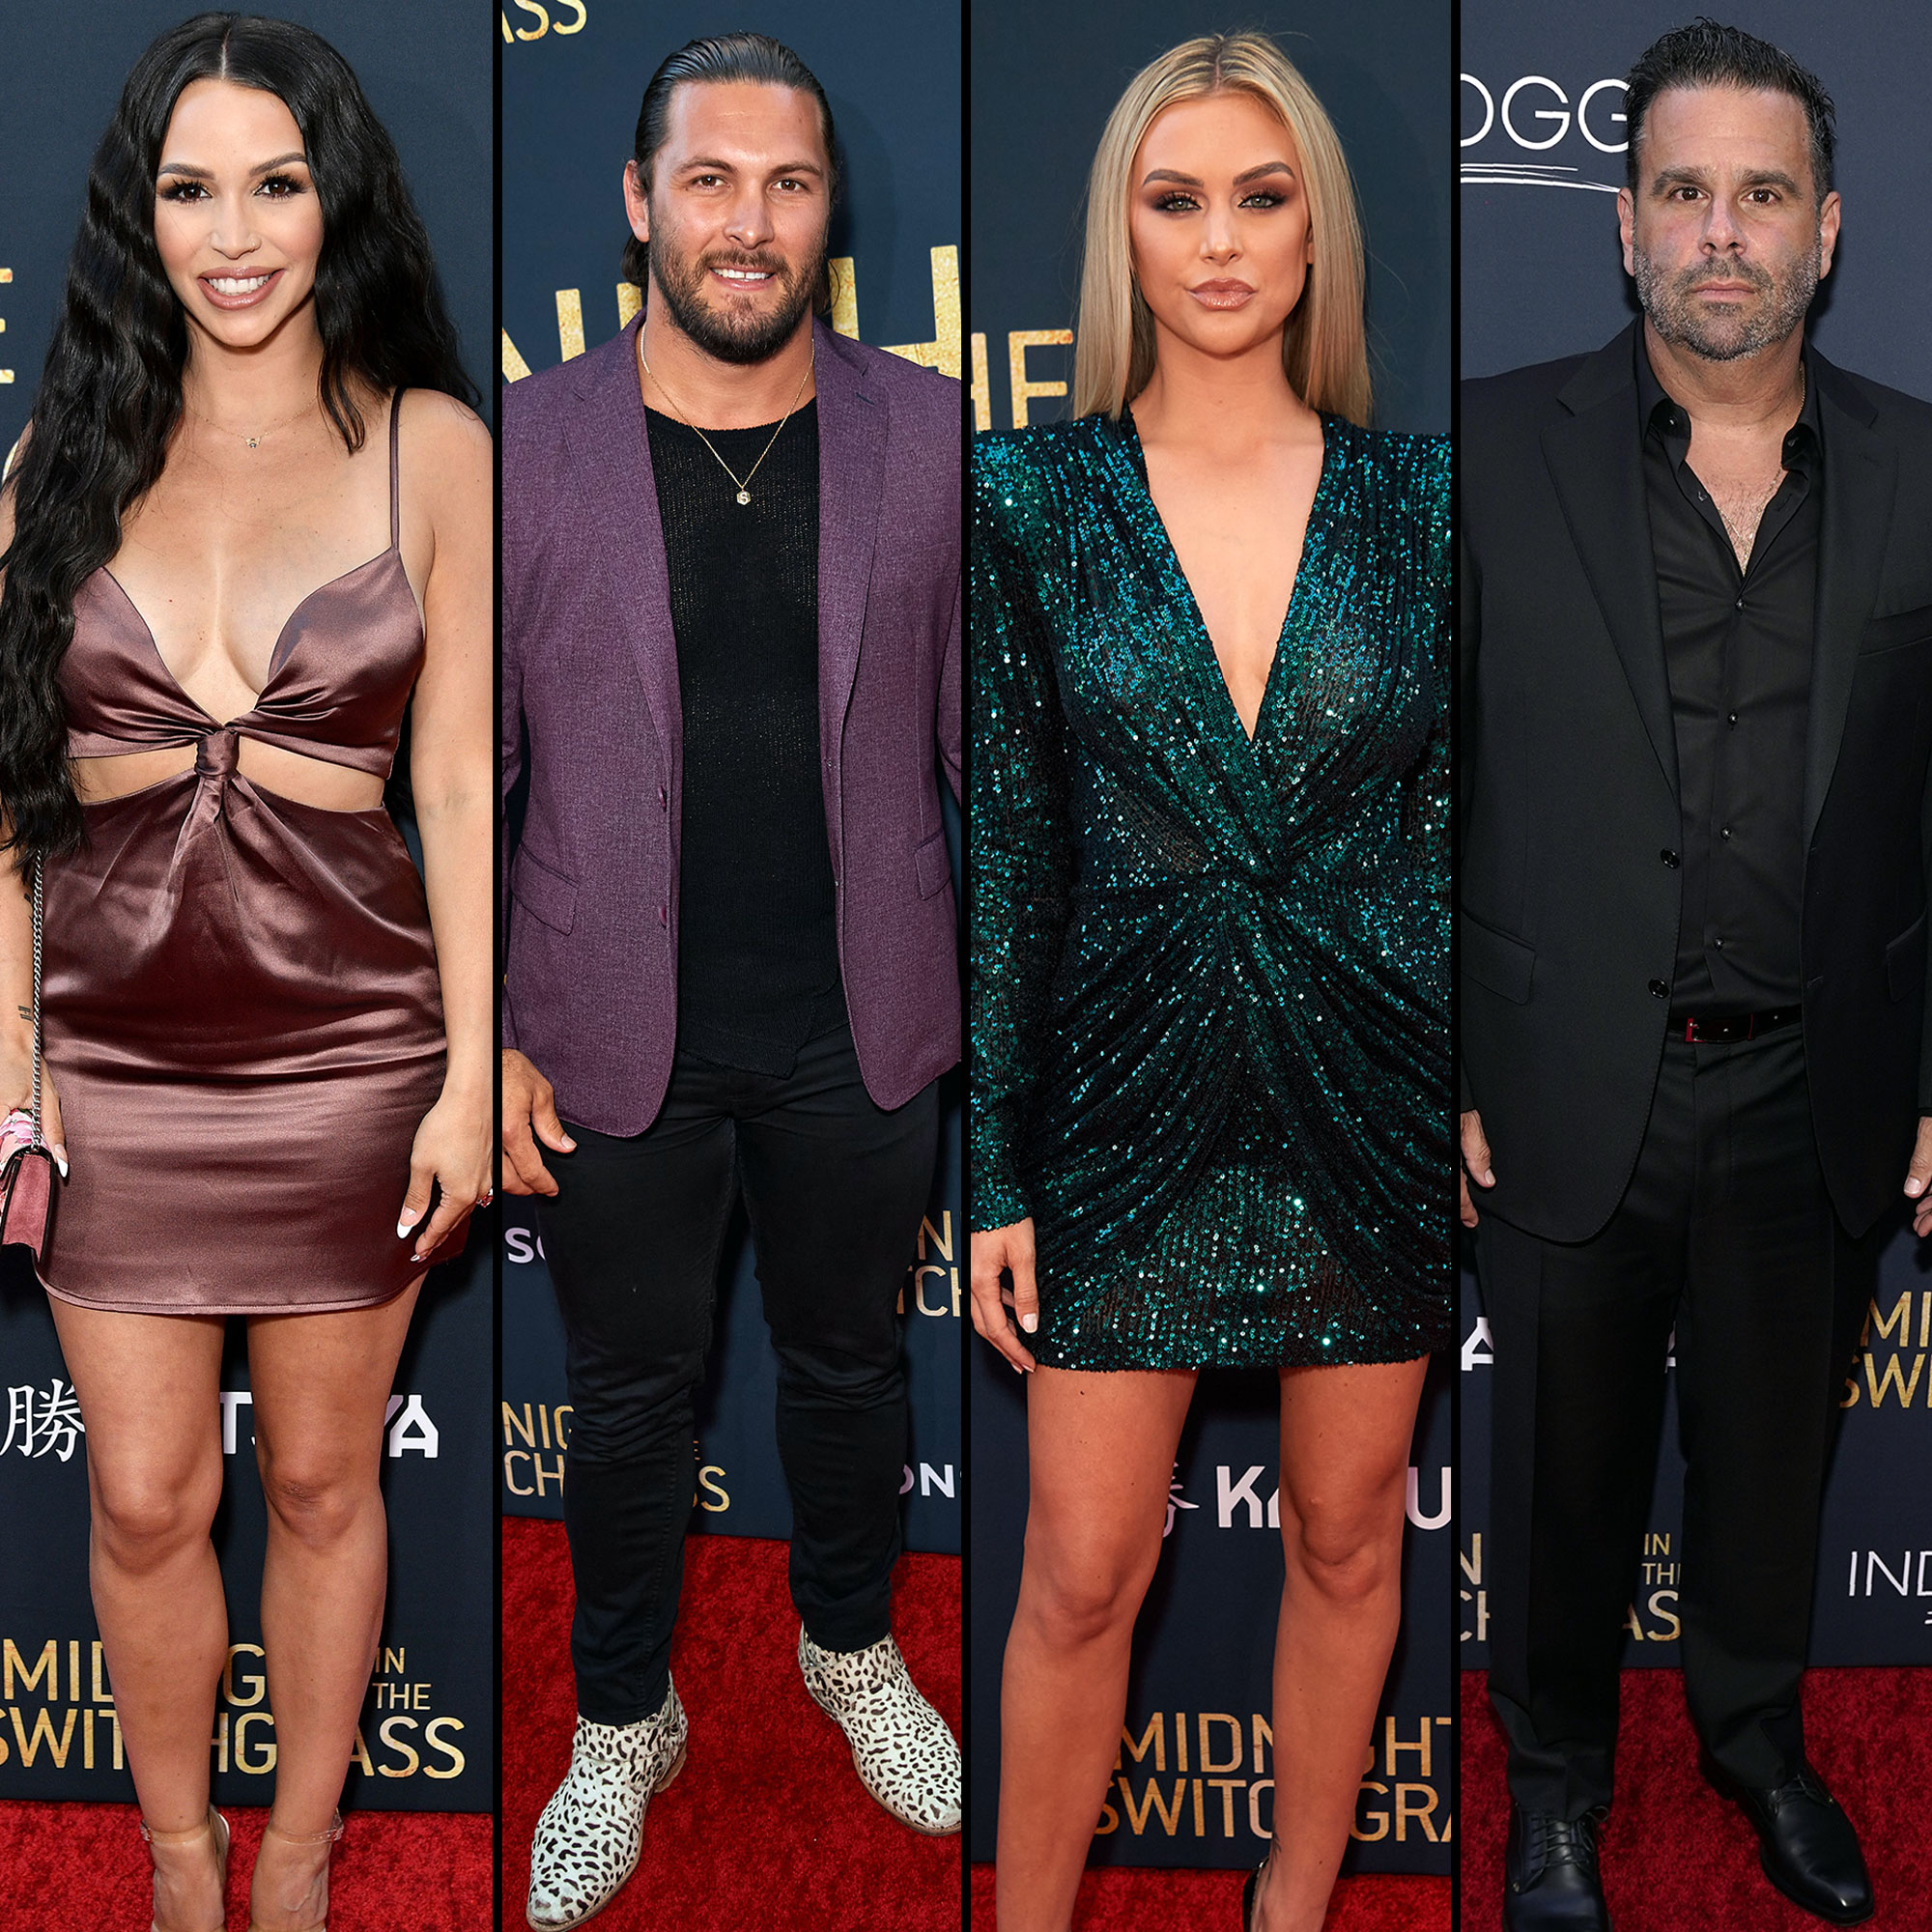 https://www.usmagazine.com/wp-content/uploads/2021/11/Vanderpump-Rules-Scheana-Shay-and-Brock-Davies-Think-Lala-and-Randall-Need-Some-Time-Apart-After-Their-Split.jpg?quality=40&strip=all